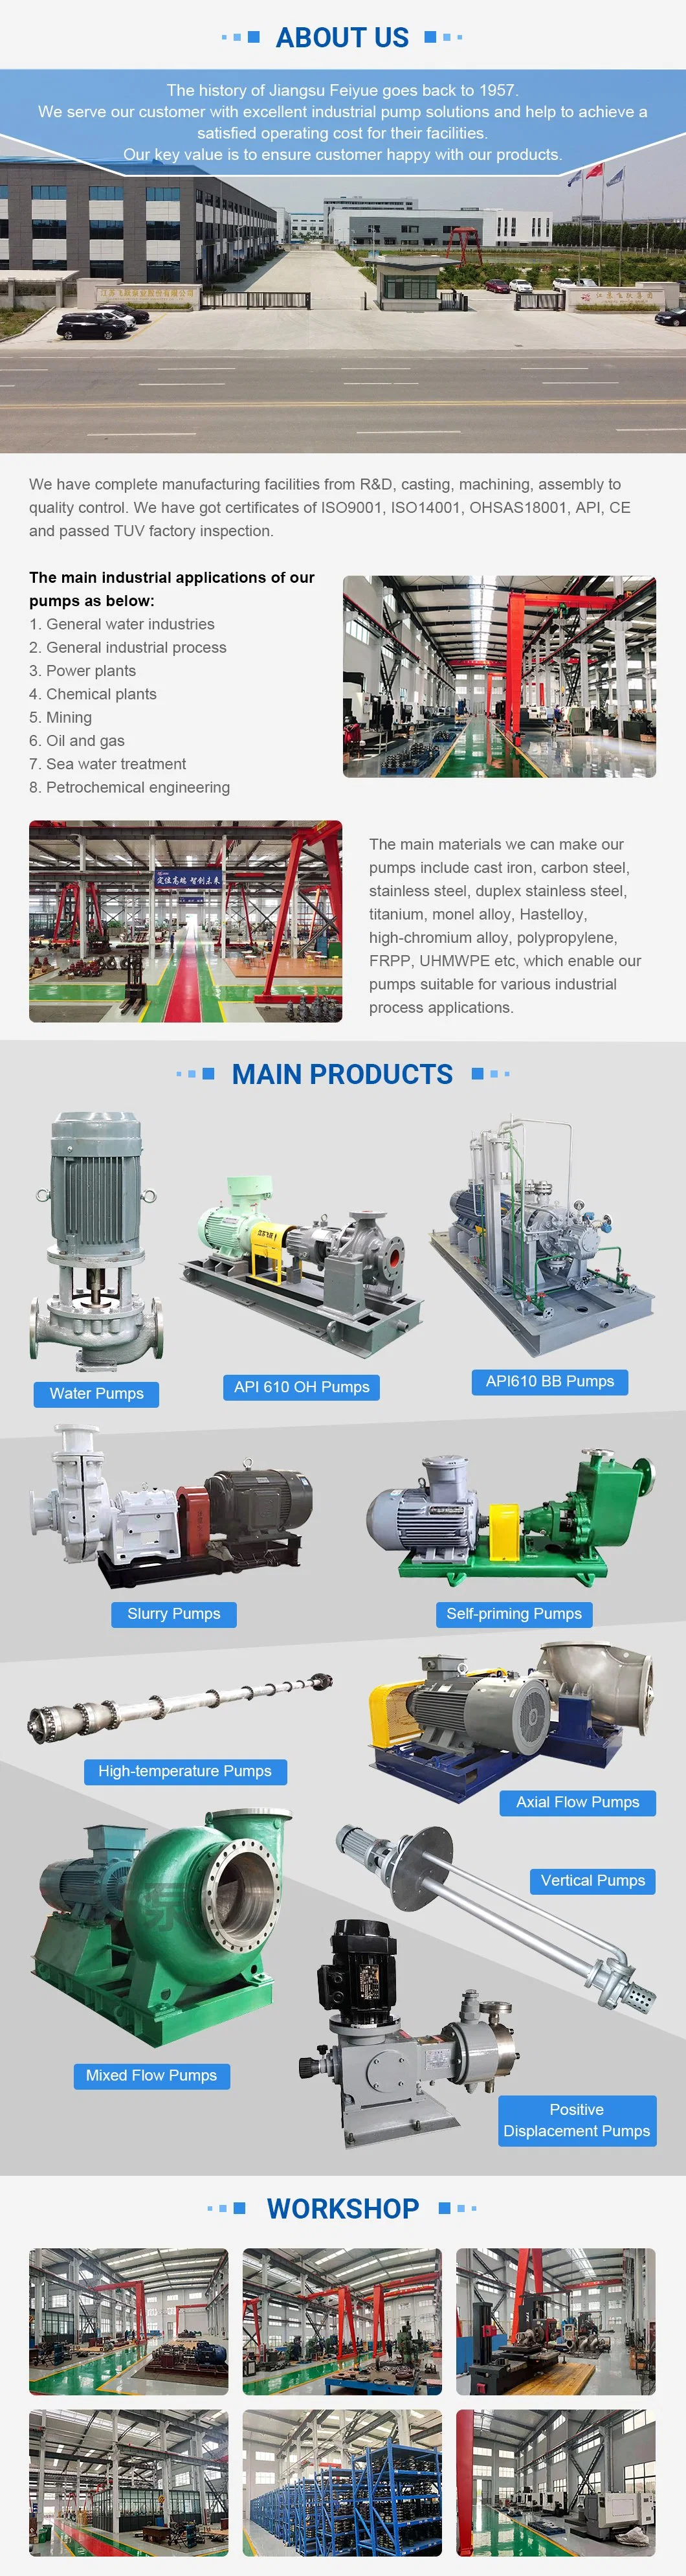 API610 Oh2 Fze Stainless Steel Material High-Temperature Resistant Horizontal Centrifugal Pump for Chemical Industry